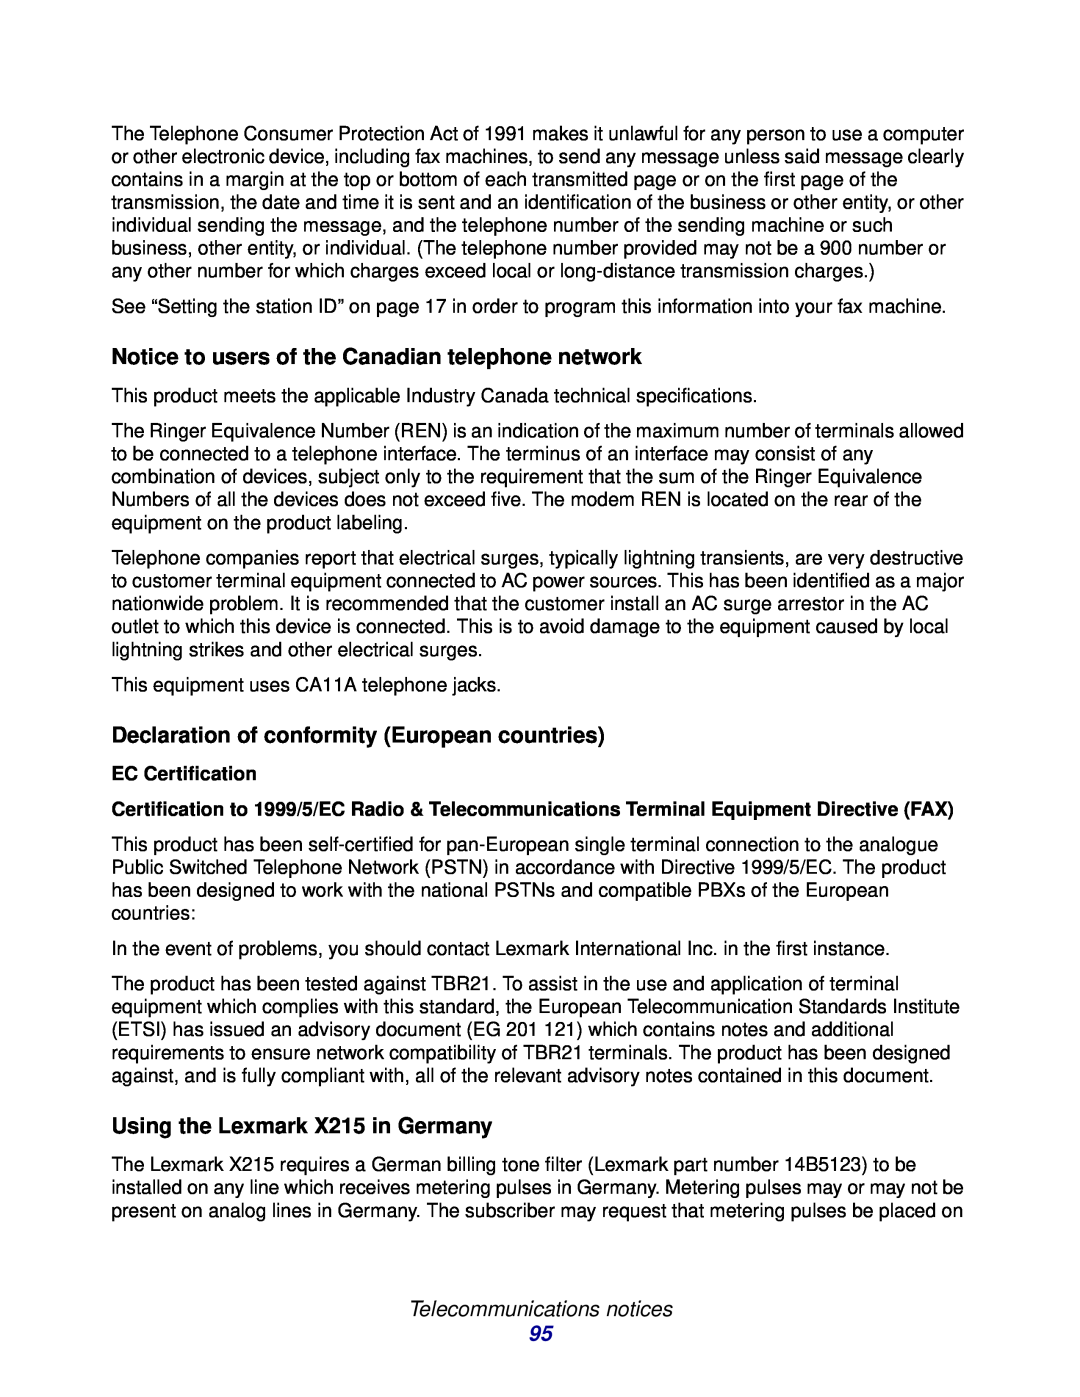 Lexmark X215 MFP manual Notice to users of the Canadian telephone network, Declaration of conformity European countries 